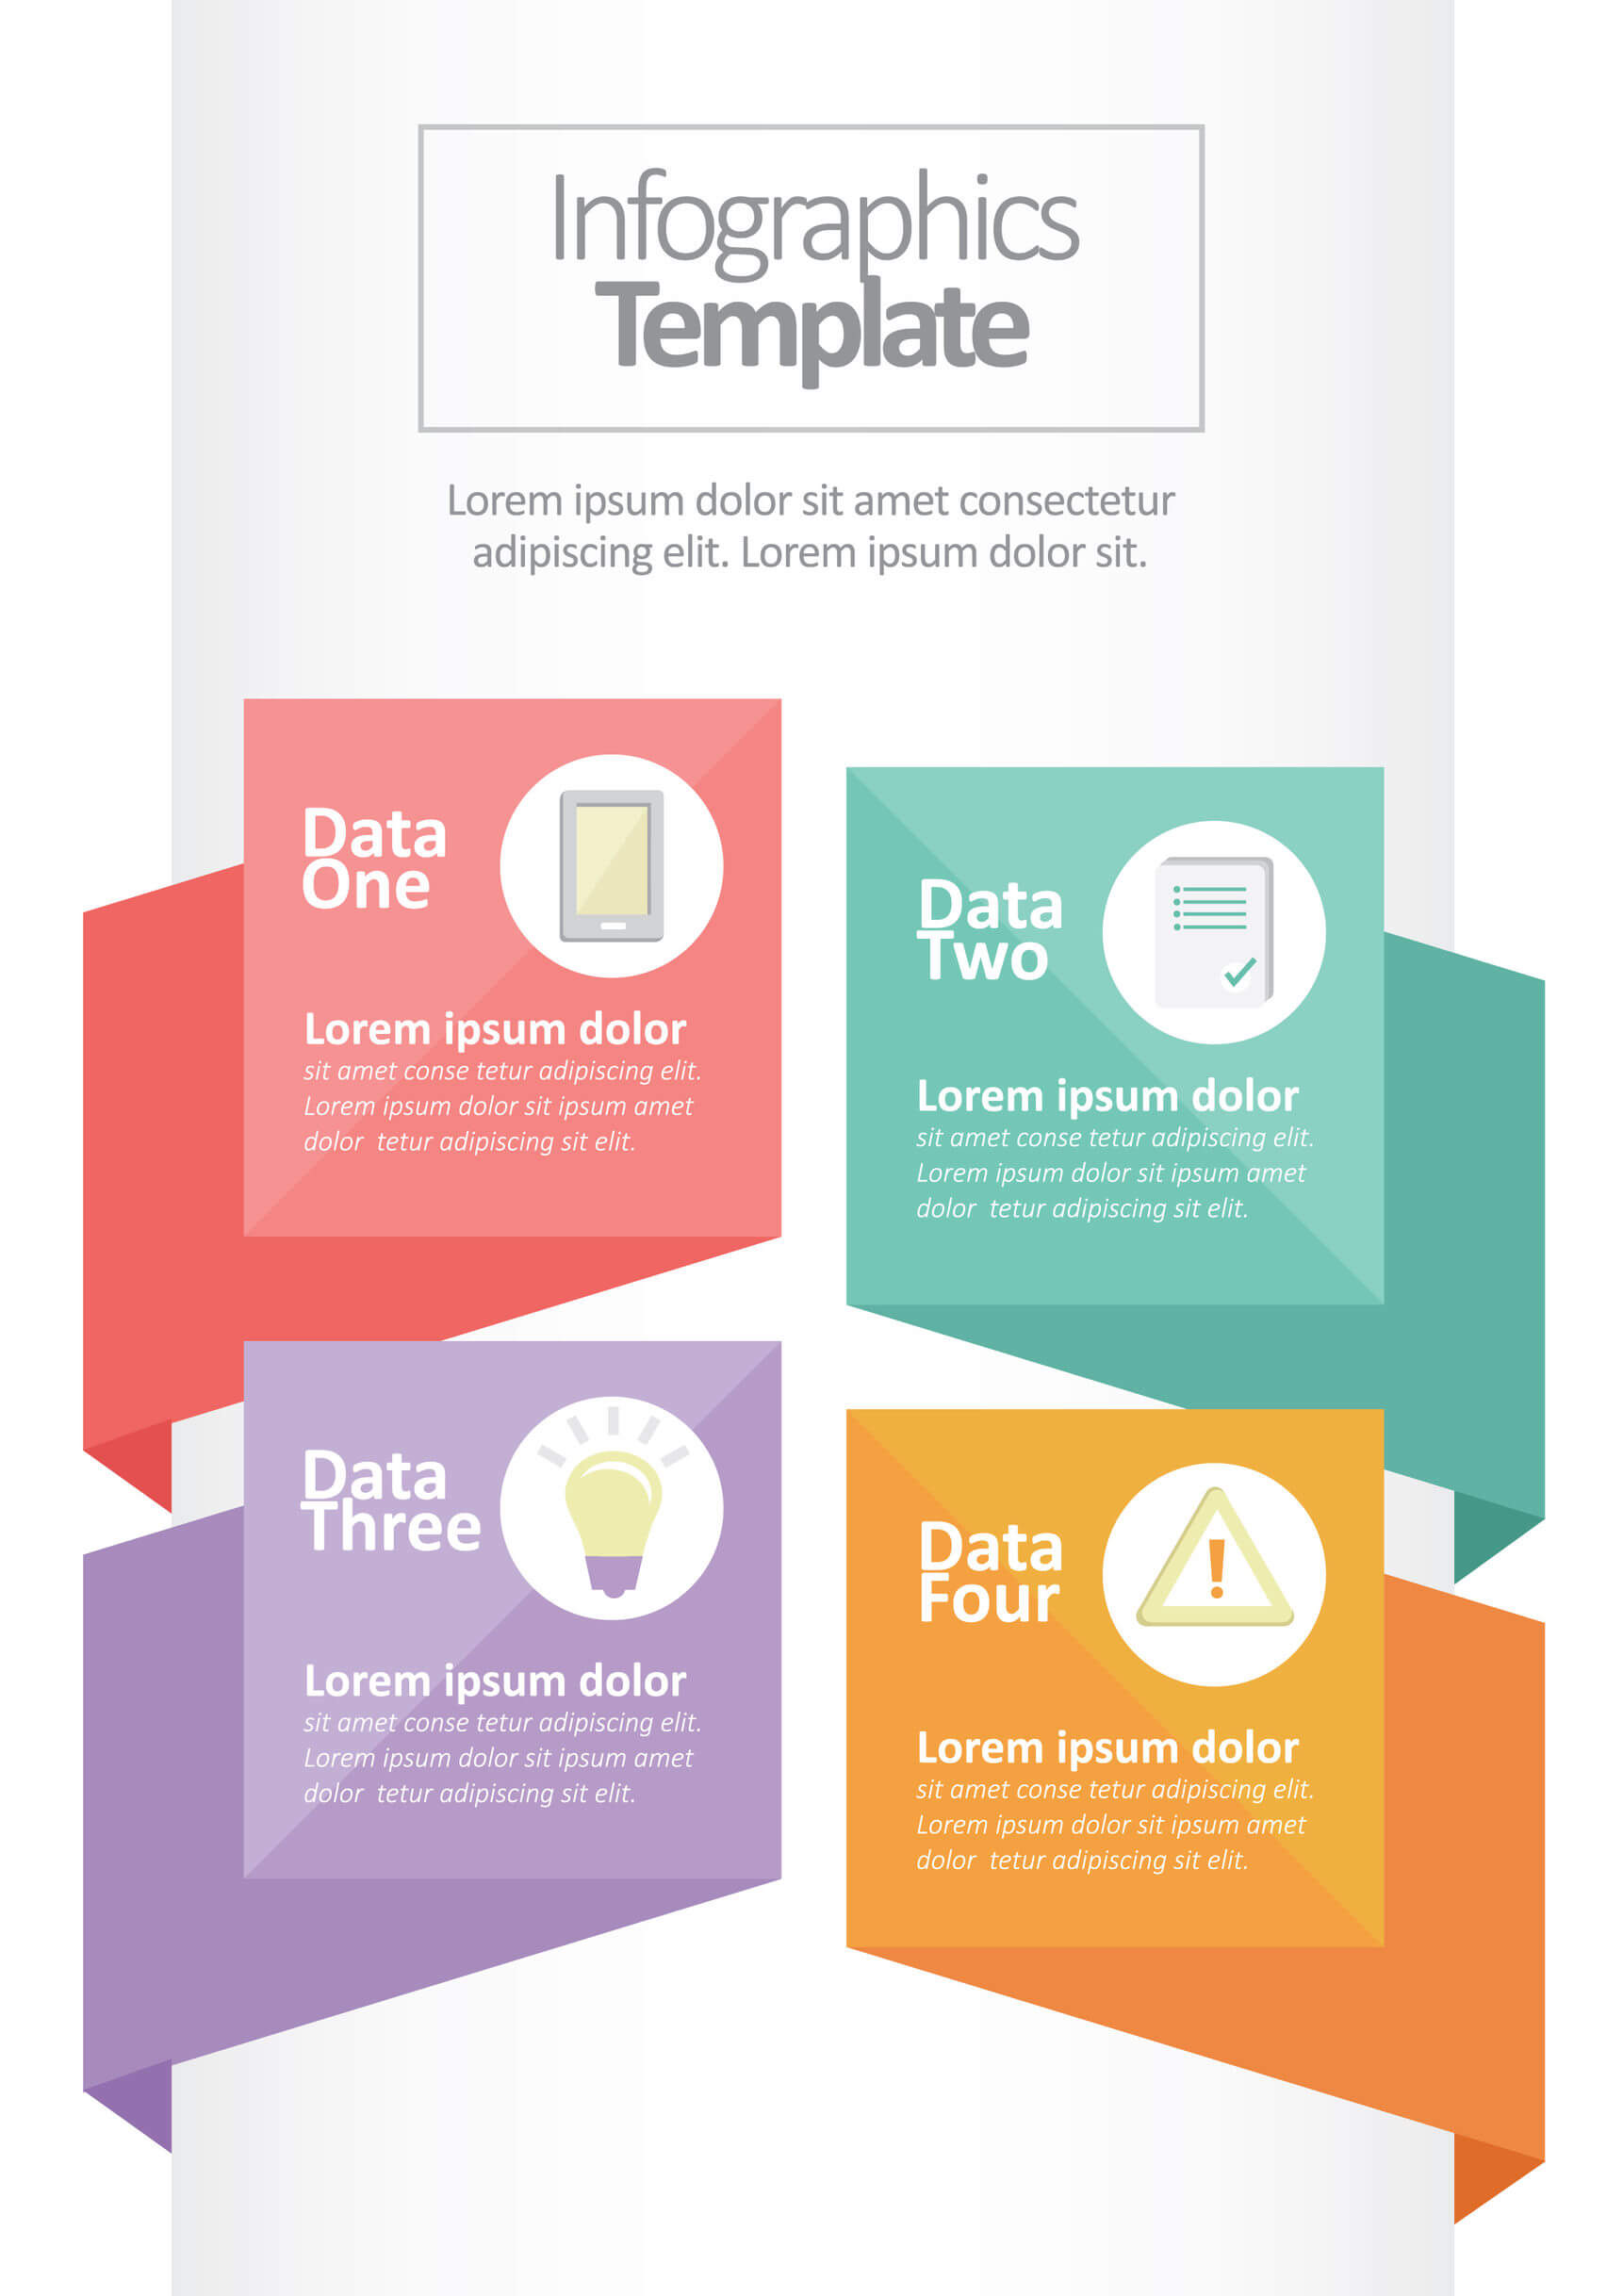 5 Free Cool Infographic Template Vectors | Bull Share